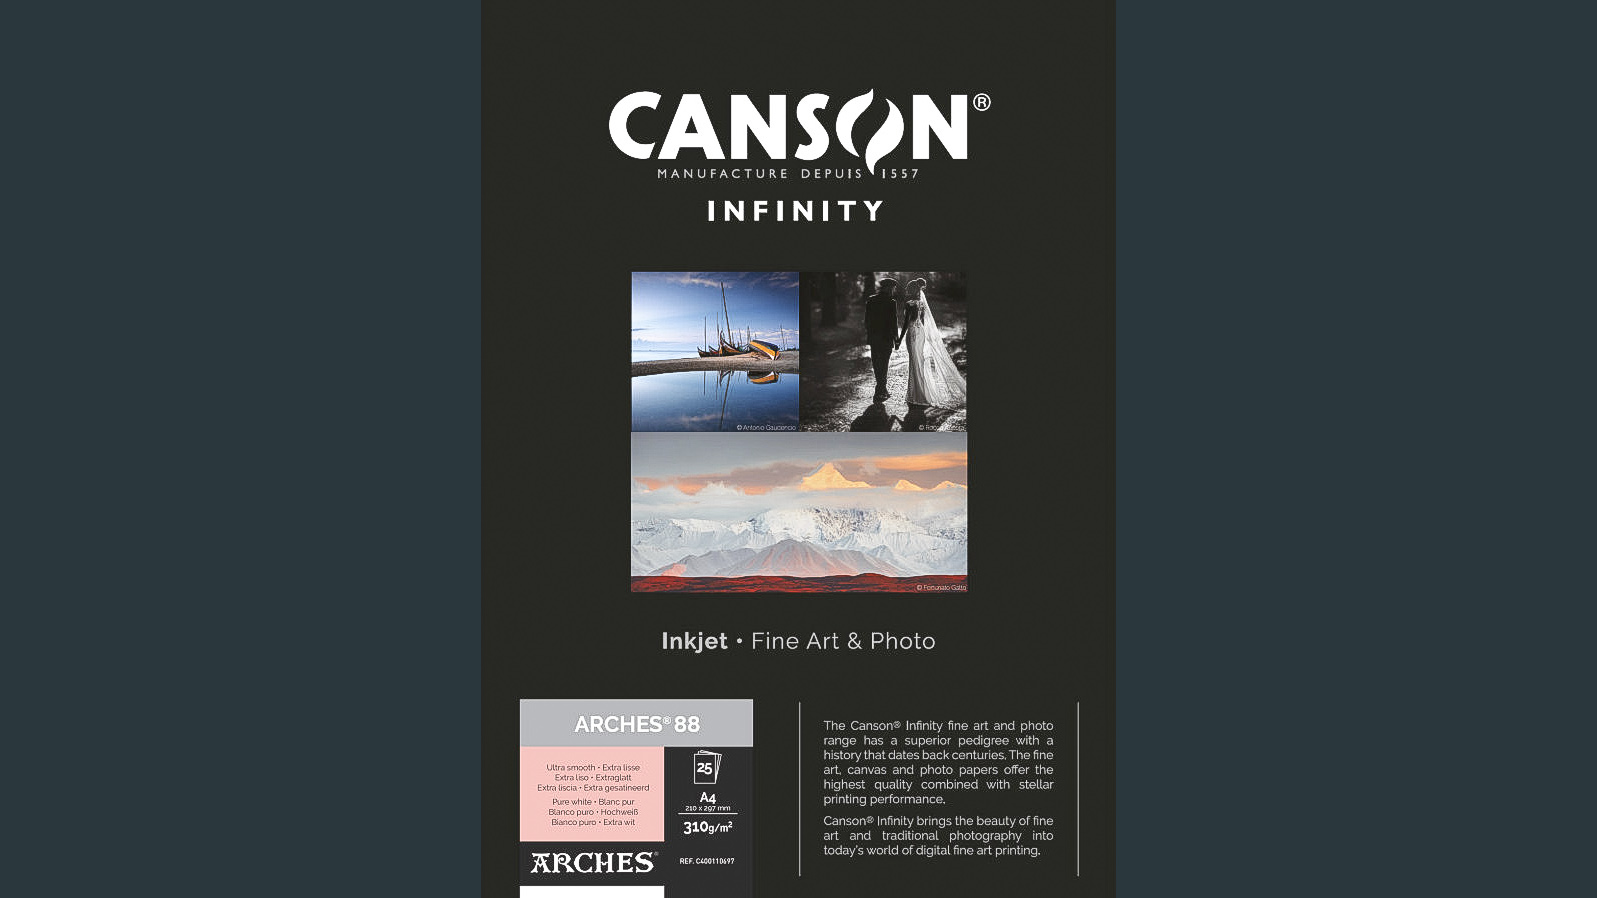 Canson Infinity ARCHES 88, one of the best photo papers